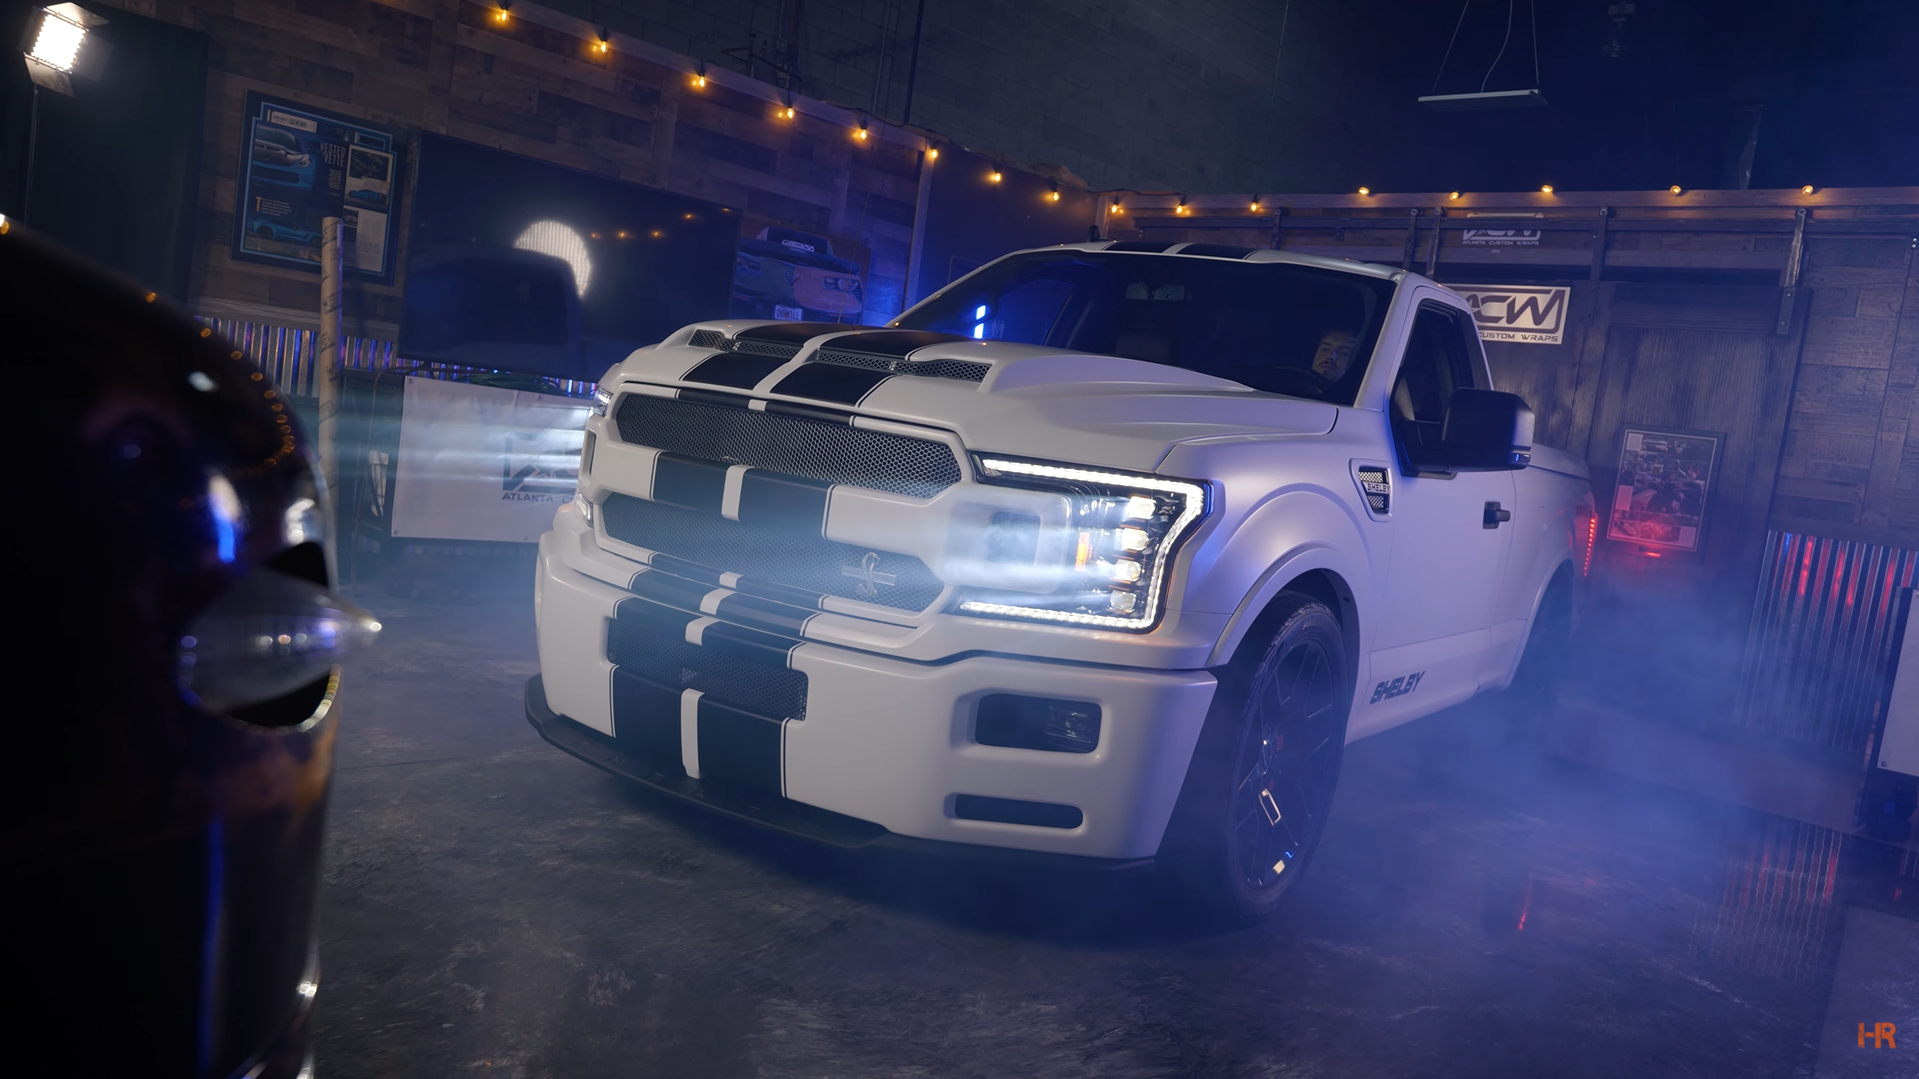 A Ford F-150 Shelby Super Snake with Morimoto XB LED headlights.